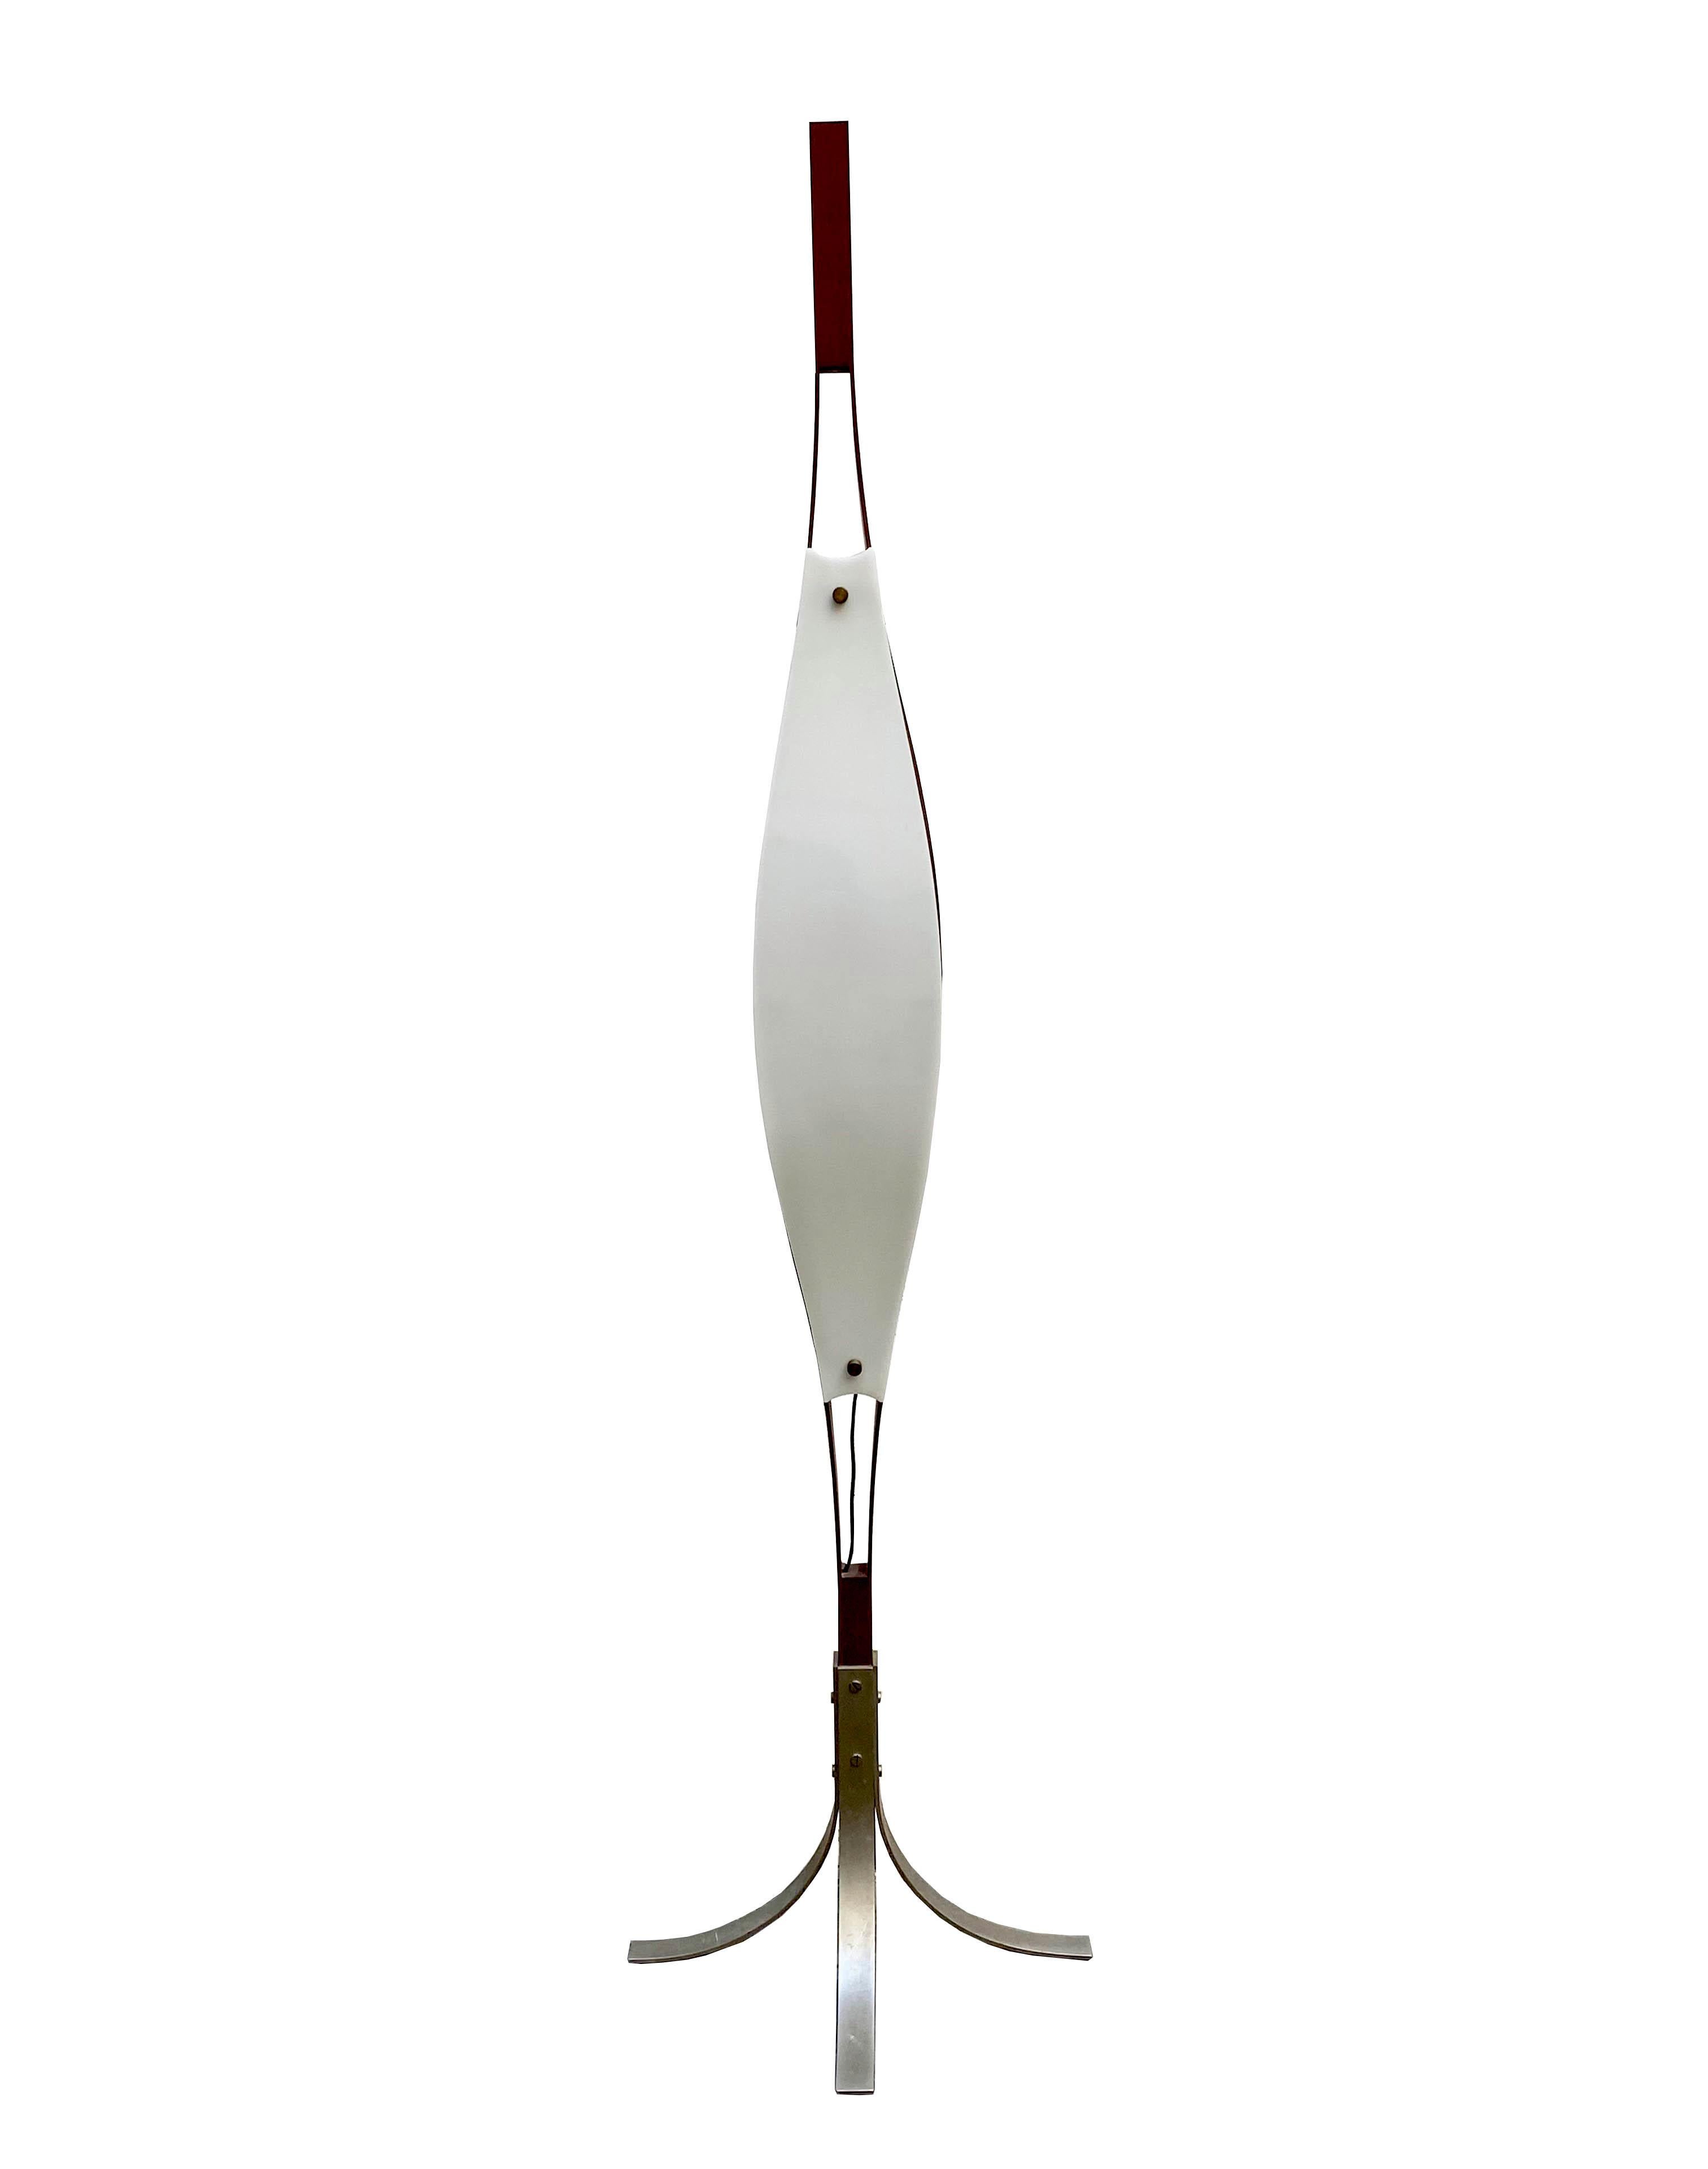 The Goffredo Reggiani floor lamp is a sculptural piece with two walnut and two plexiglass panels mounted on stainless steel legs. Made in Italy, circa 1960.